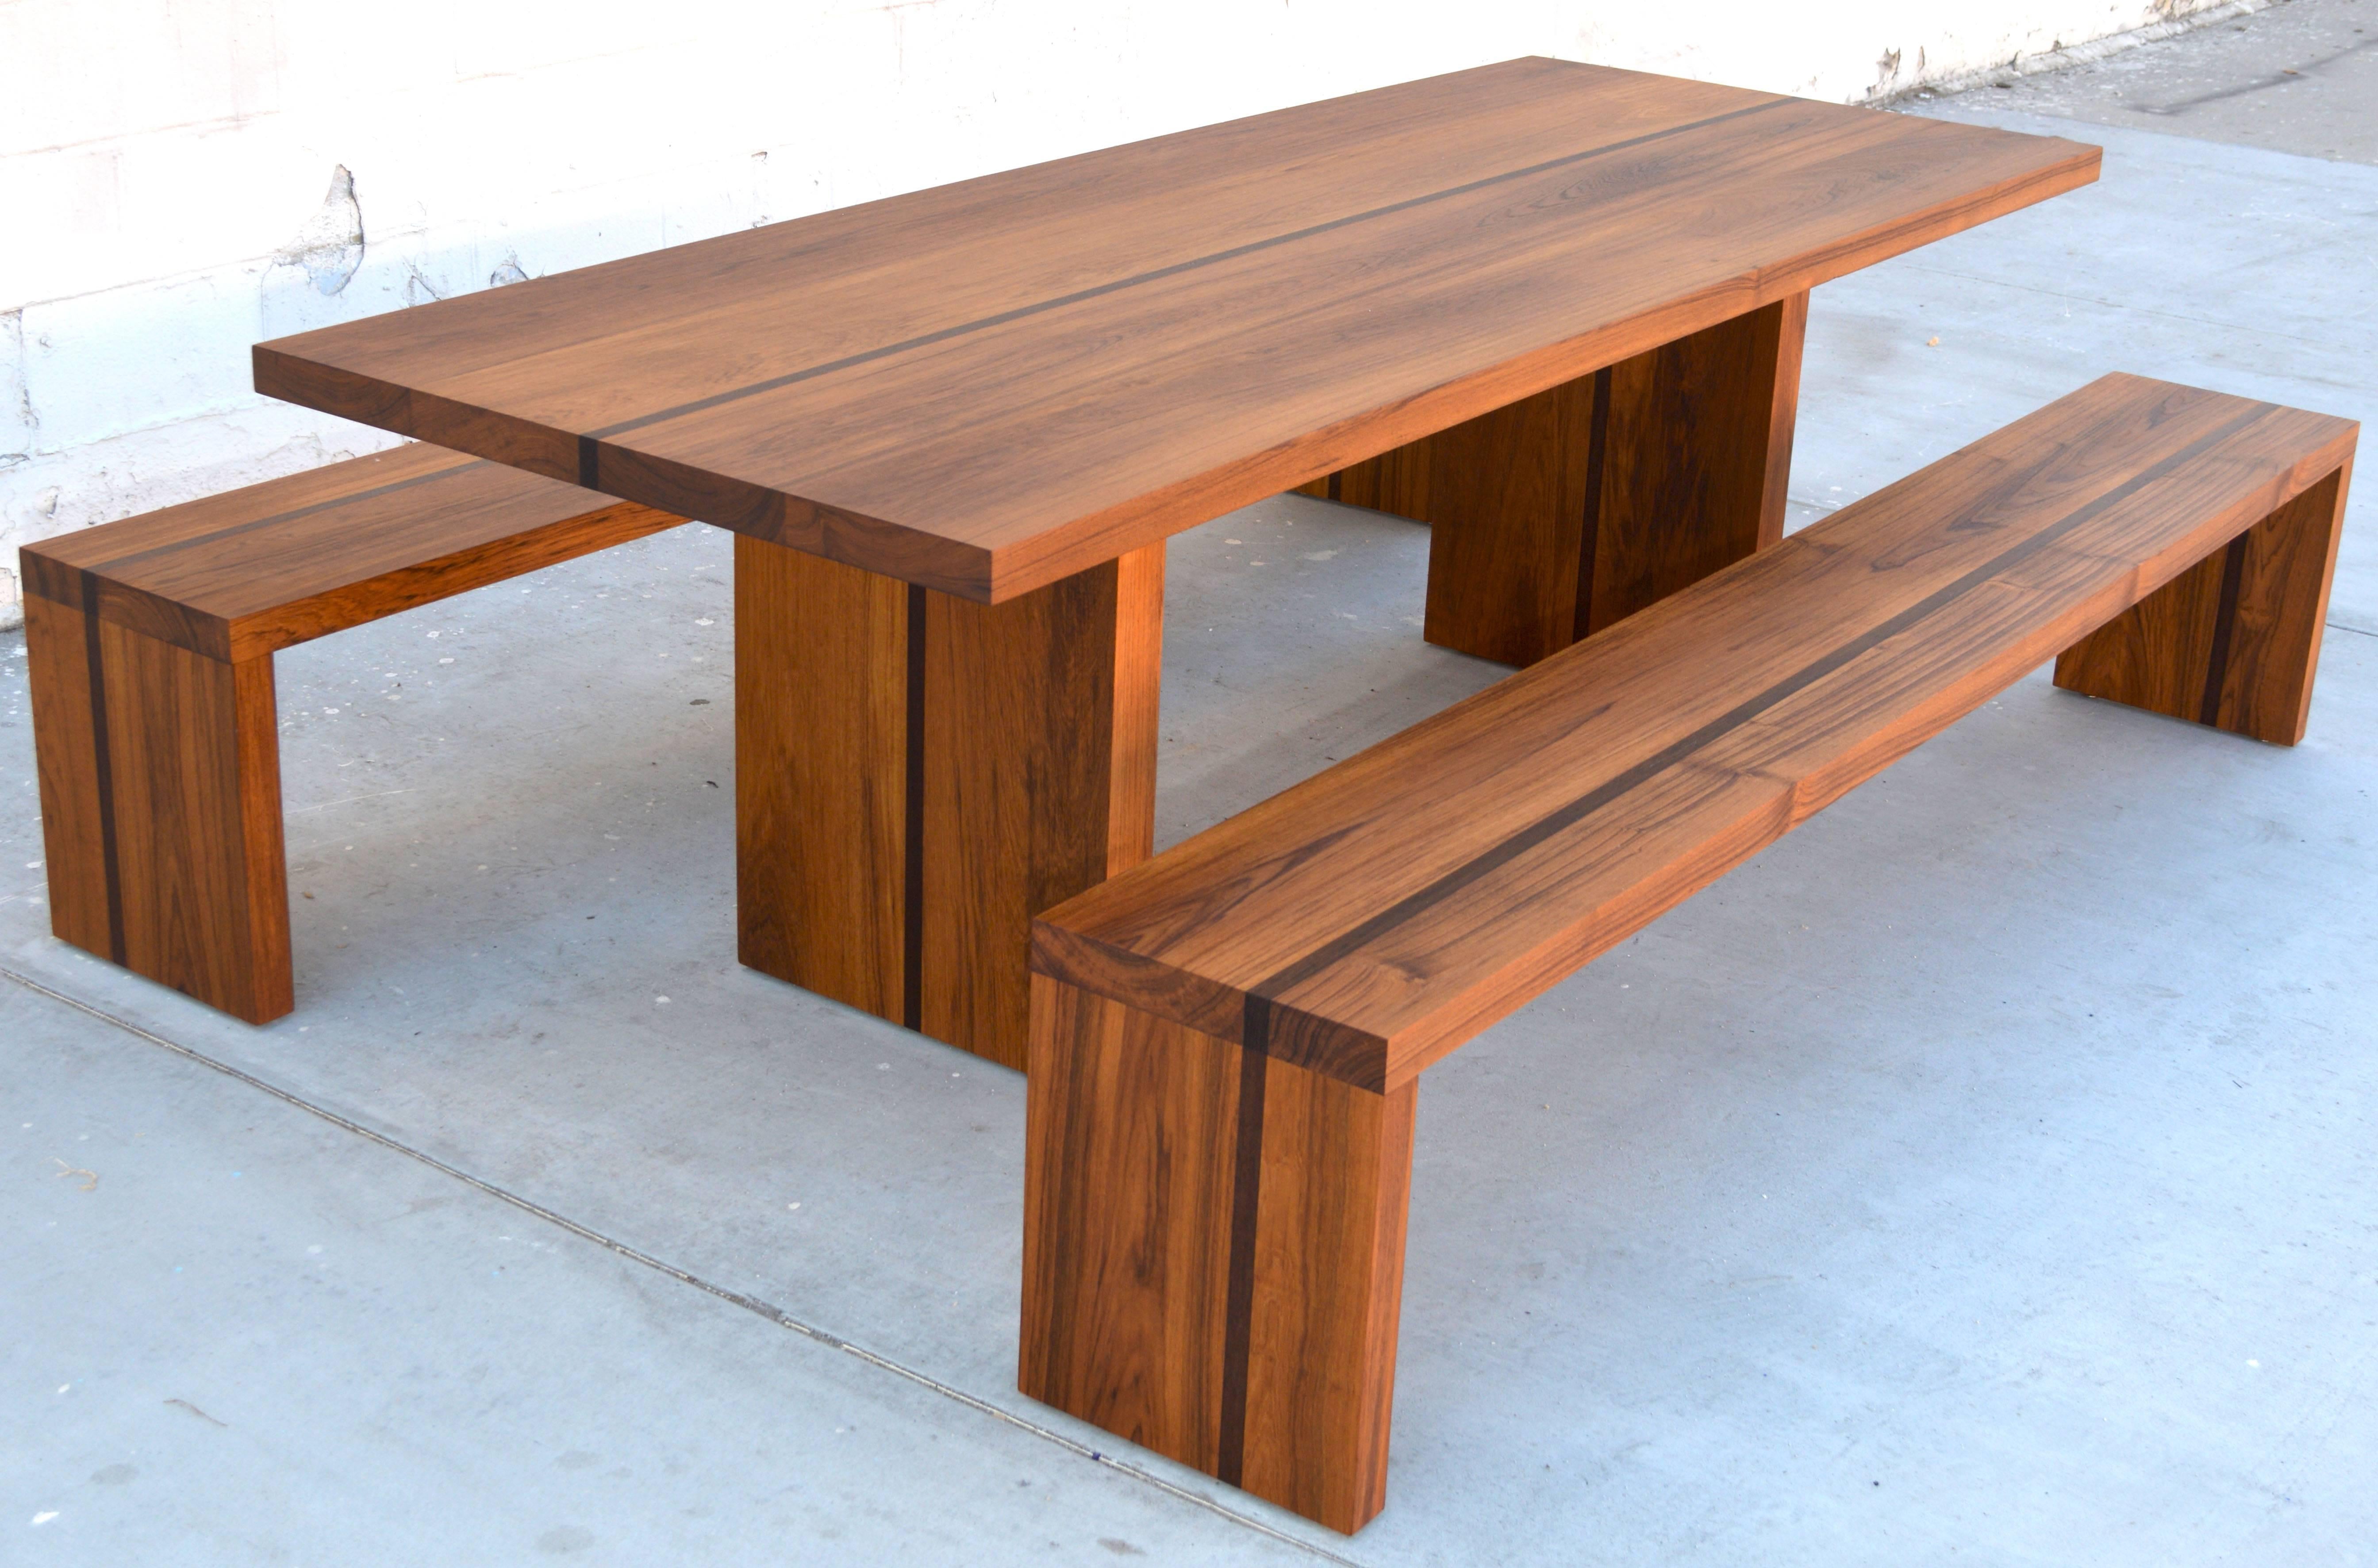 Zen and the outdoor dining table. This custom built table and benches are made from teak and wenge wood. Designed to withstand any climate. Legs are reinforced with 1/2 thick steel plates. We build this table to order in our own workshop in Los